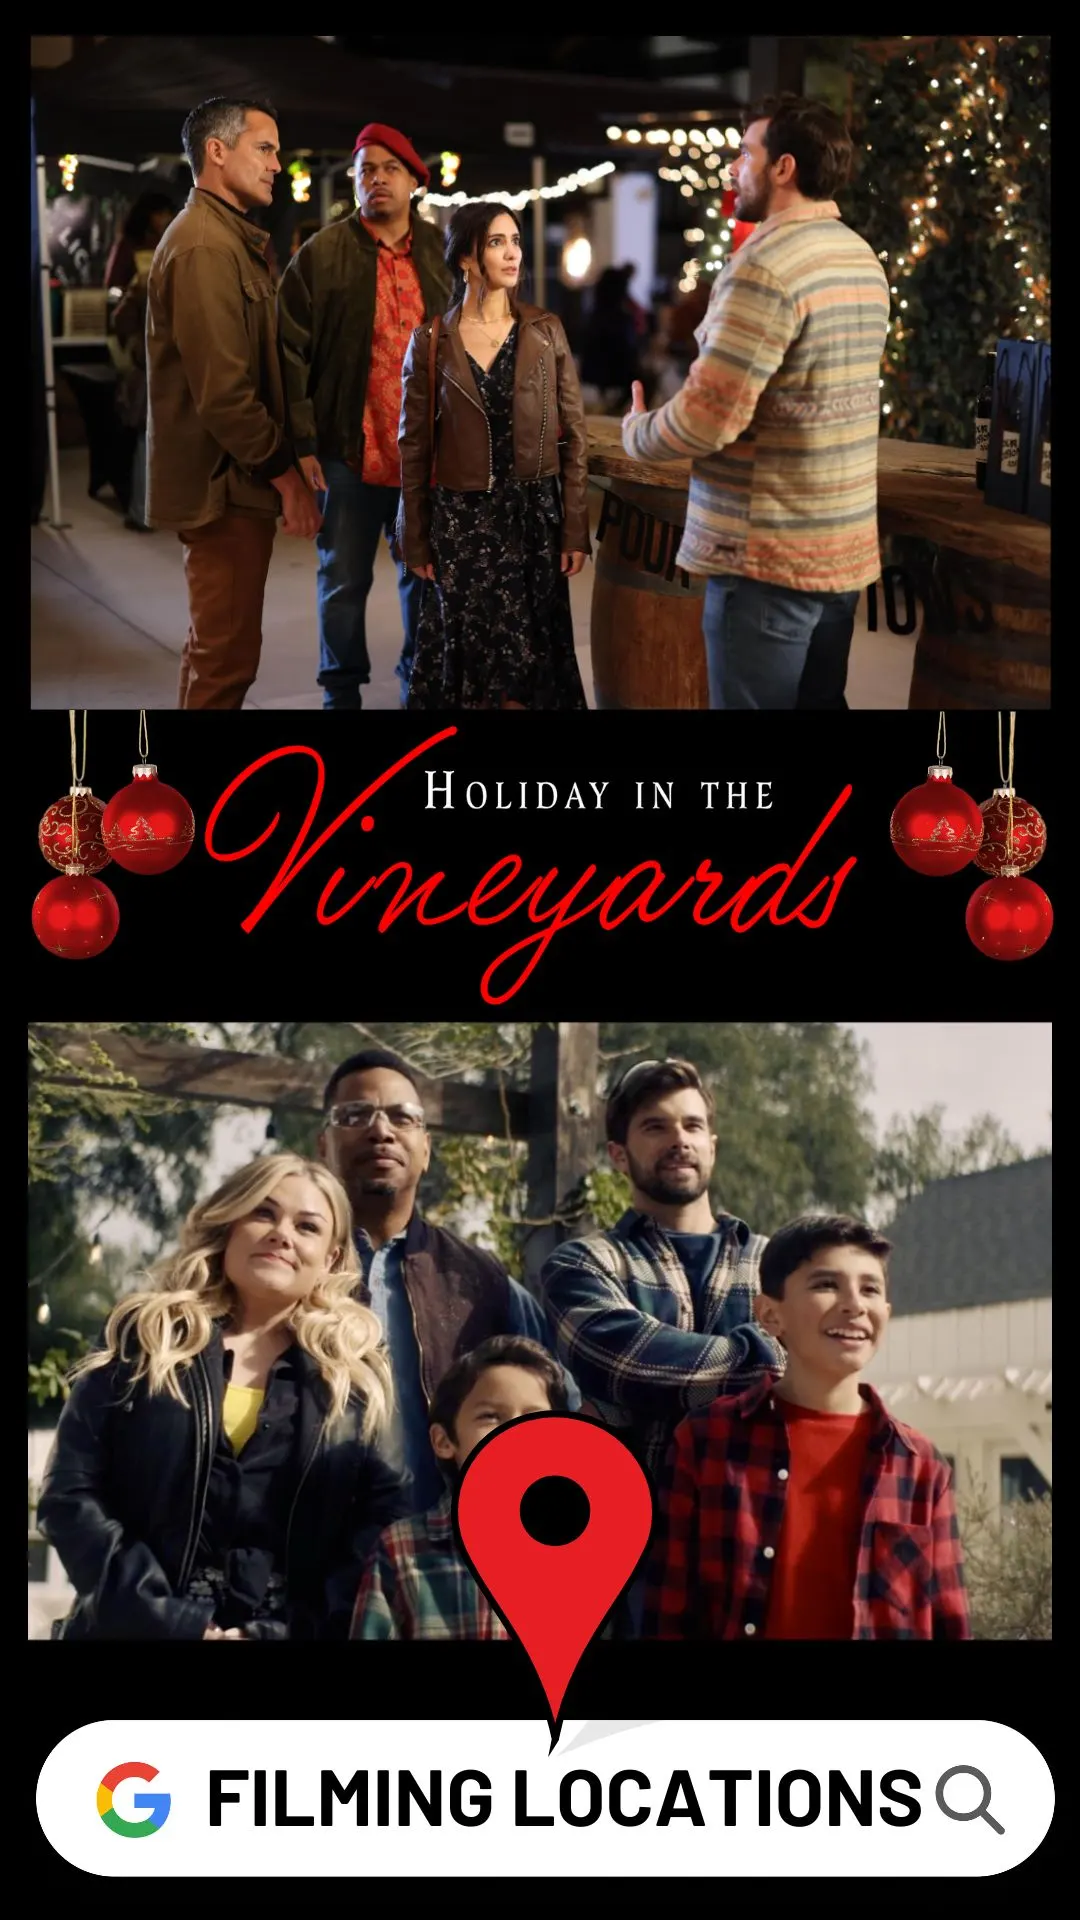 Holiday in the Vineyards Filming Locations